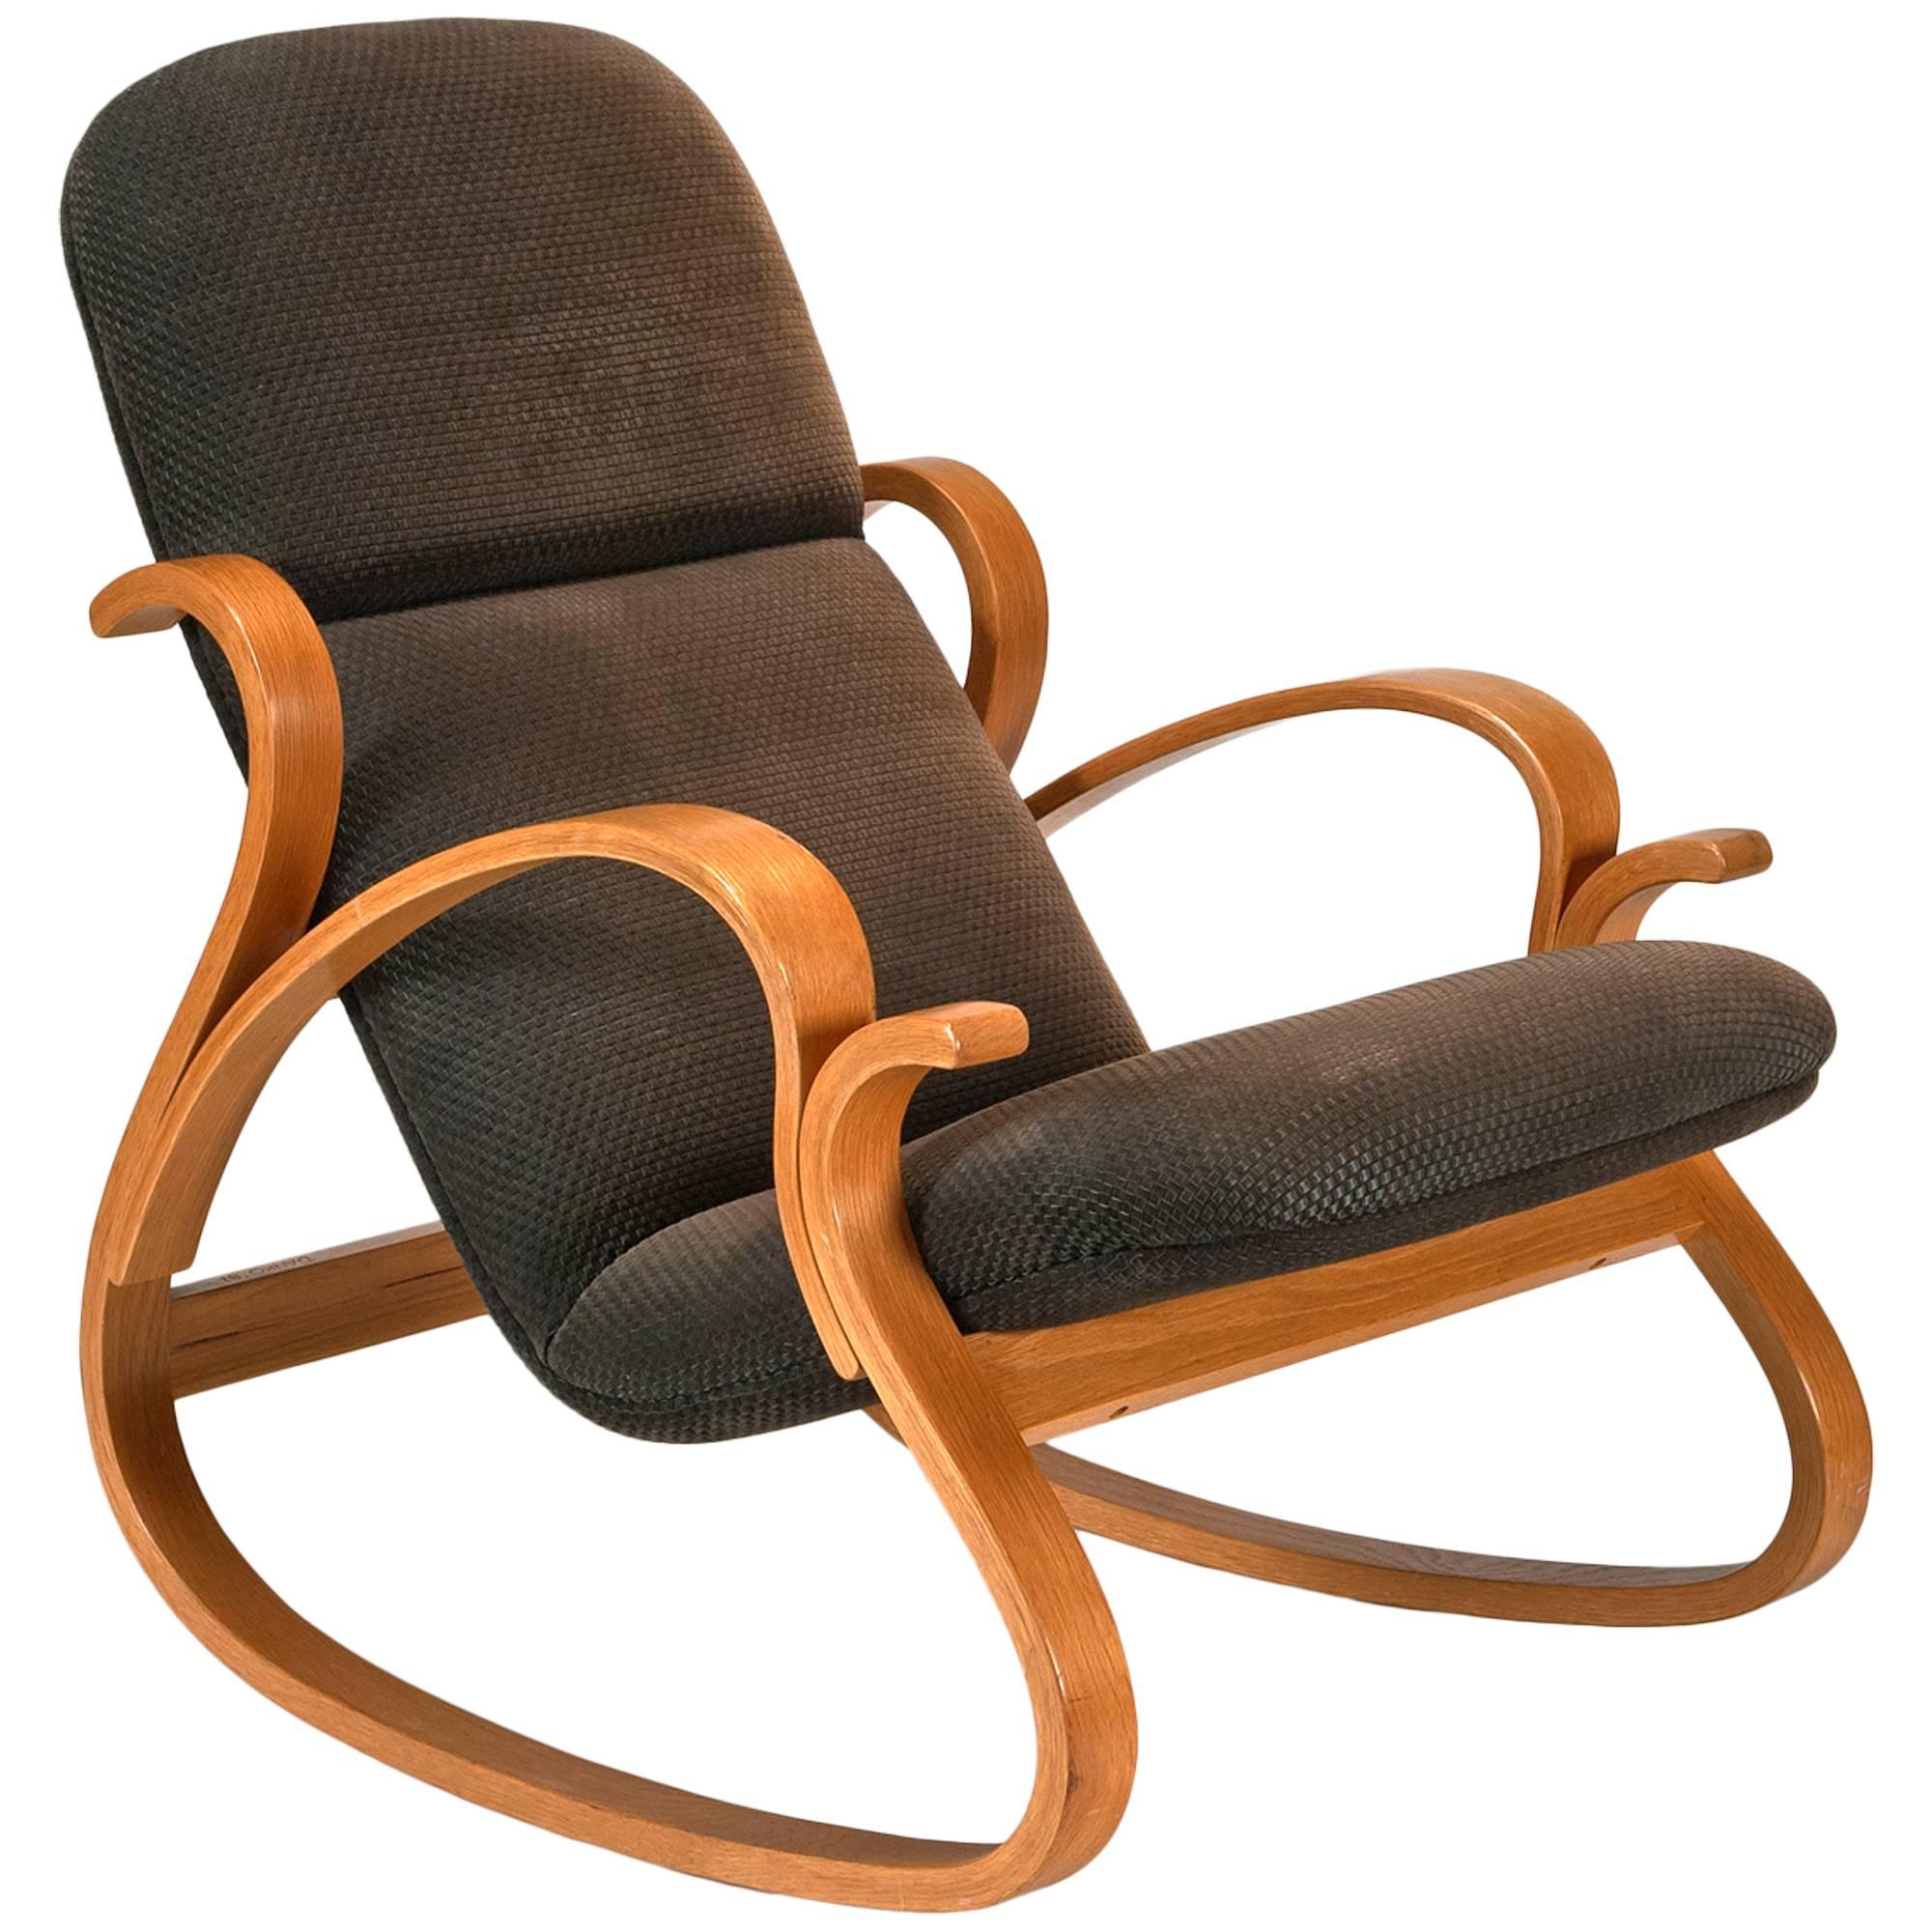 Hand-crafted Bentwood Rocking Chair by Peter Danko